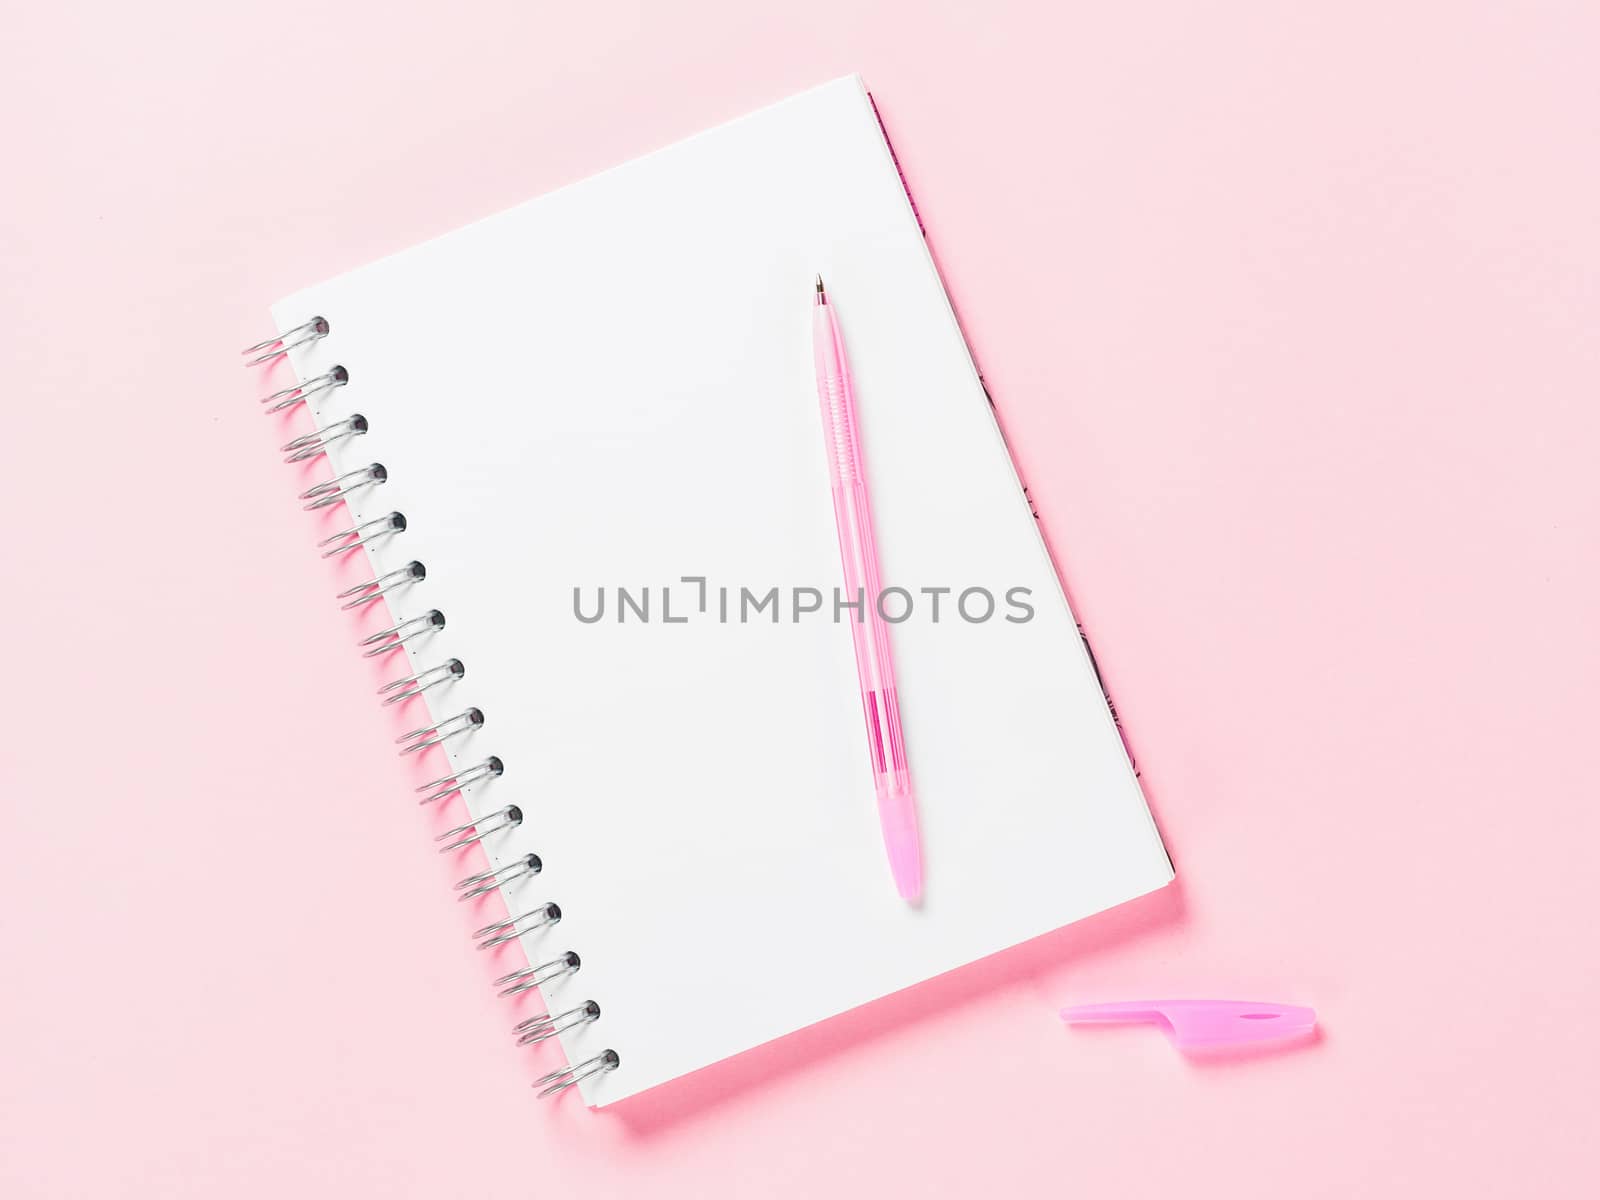 Top view of blank note paper with pen on pink pastel background. Copy space. Back to school and education concept